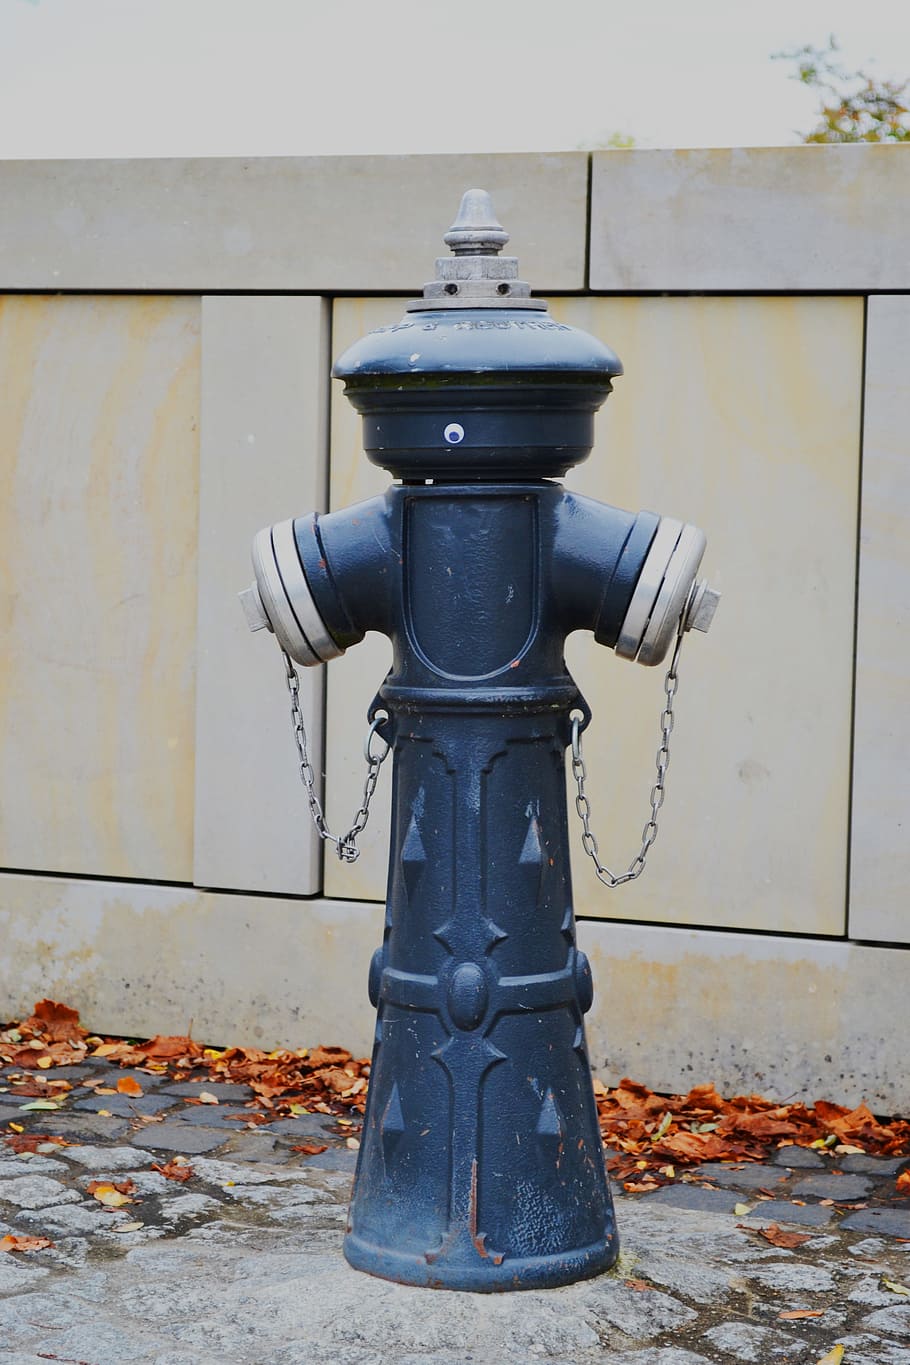 hydrant, fire, water, emergency, safety, outdoor, plug, public, security, valve